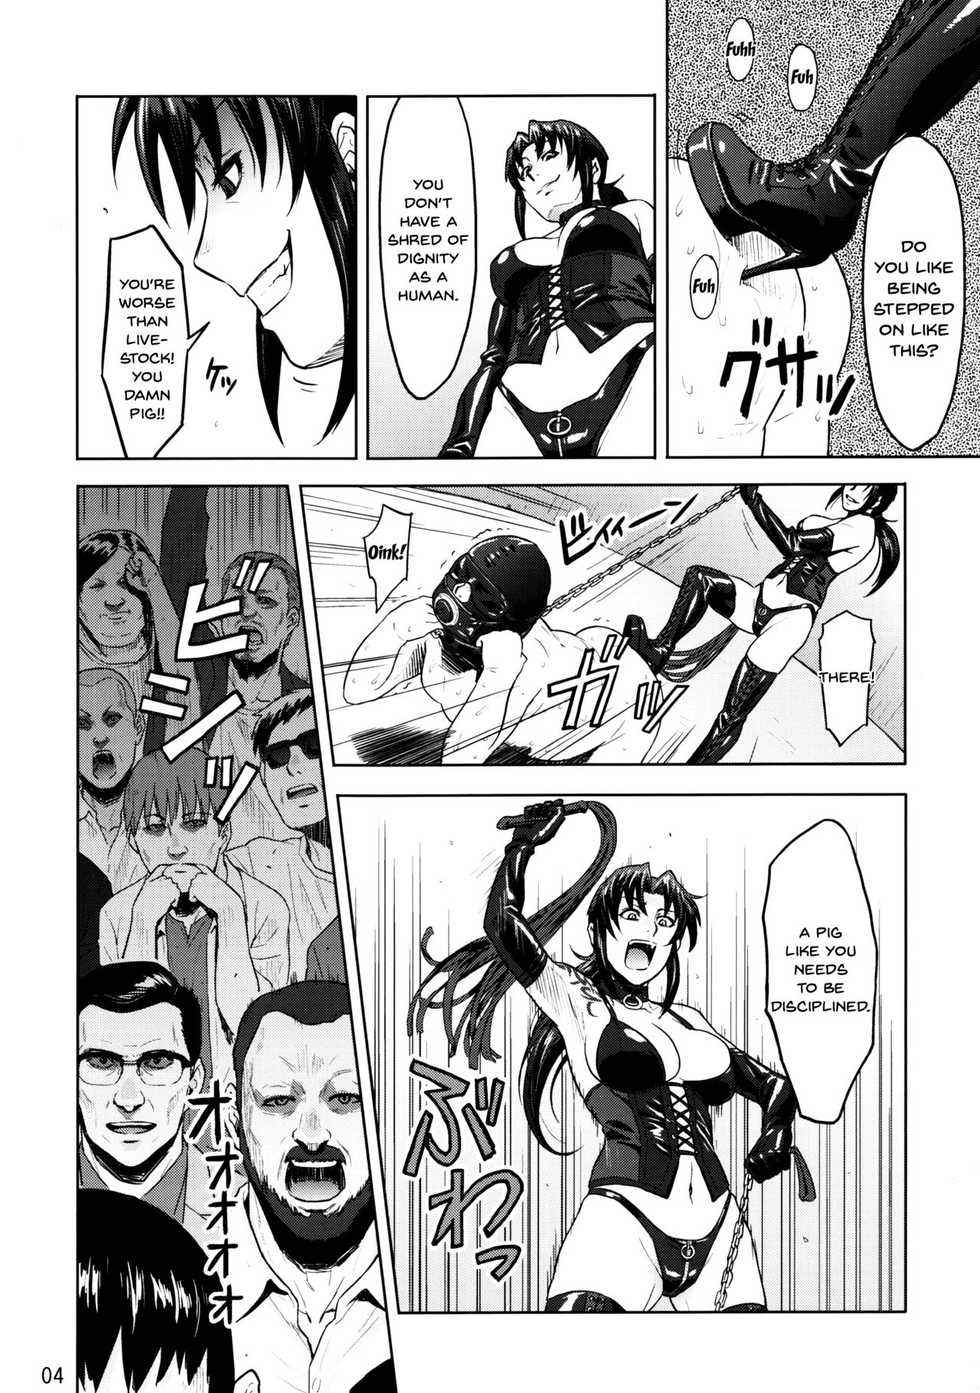 My Sister Is A Pornstar Part 1 [Rewrite] - Page 10